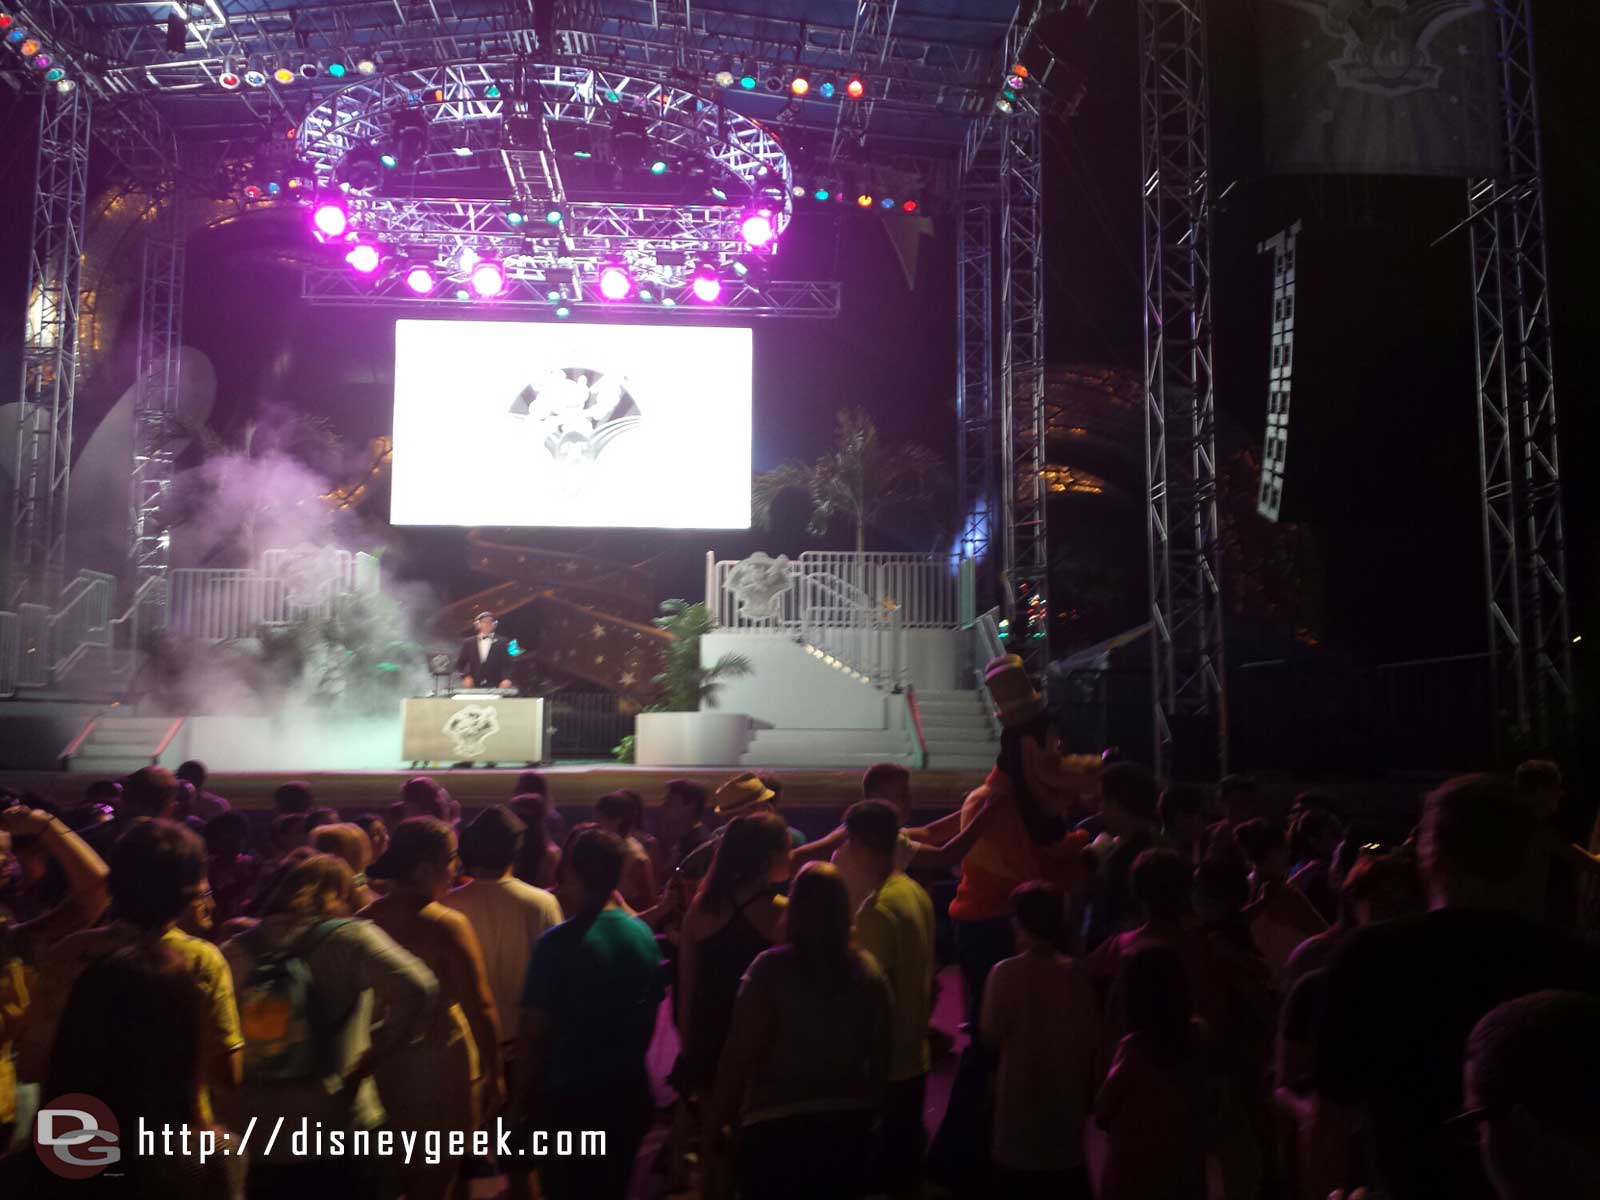 A DJ and Dance Party were on the Main Stage